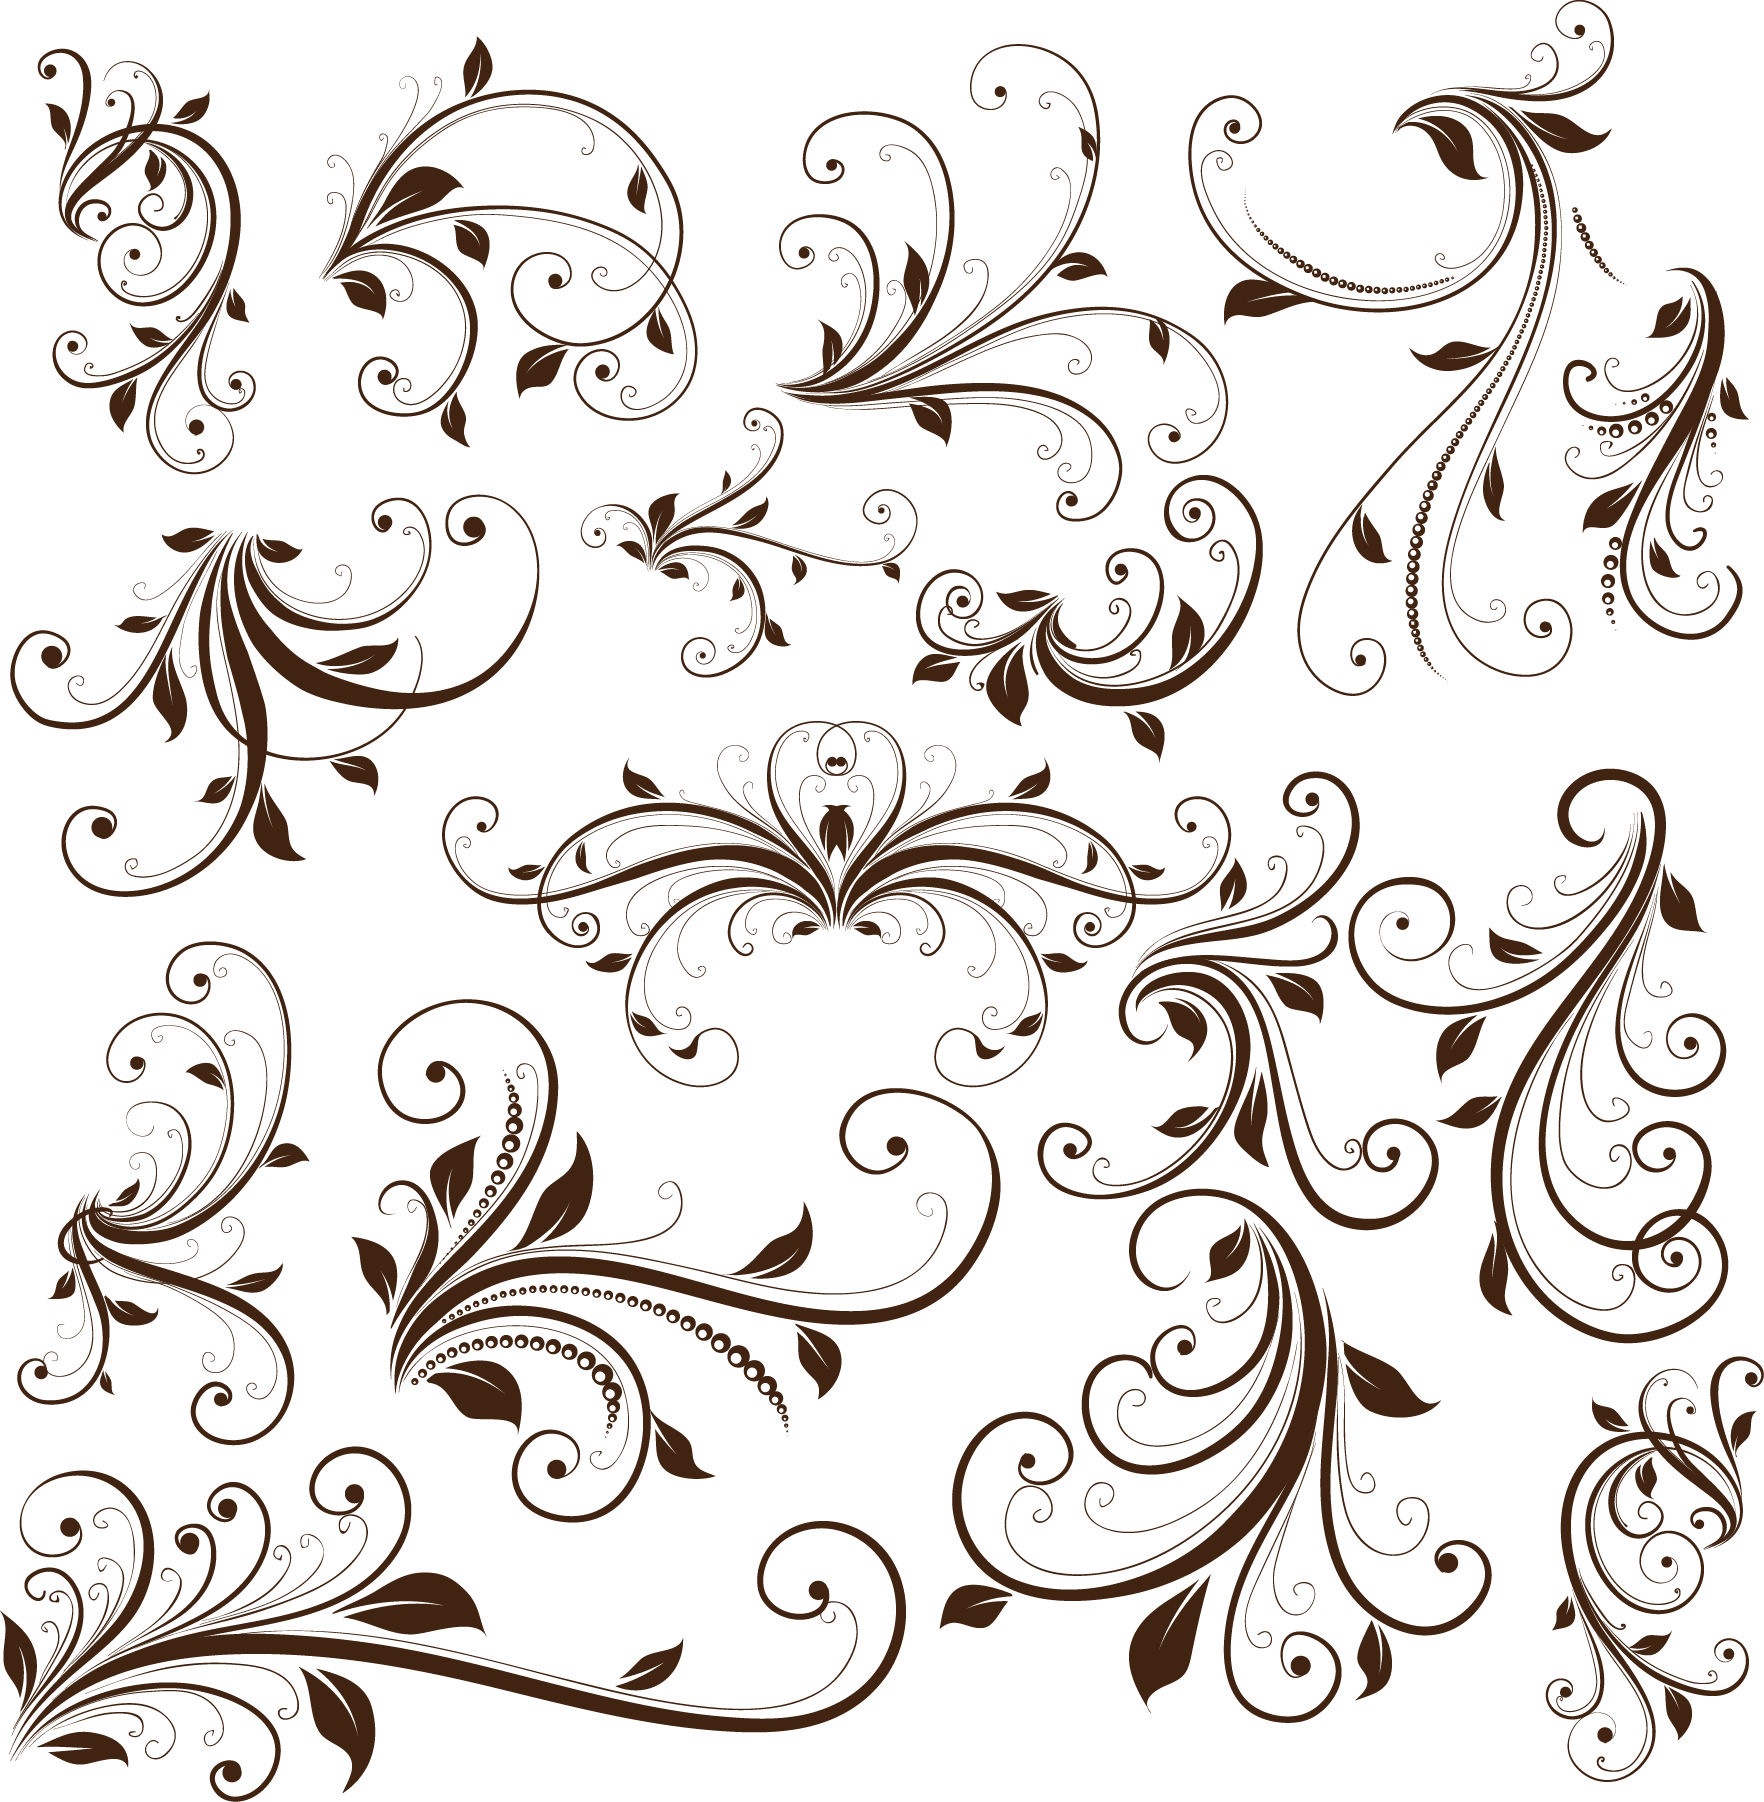 Swirl Floral Decorative Element Vector Graphic   Free Vector Graphics